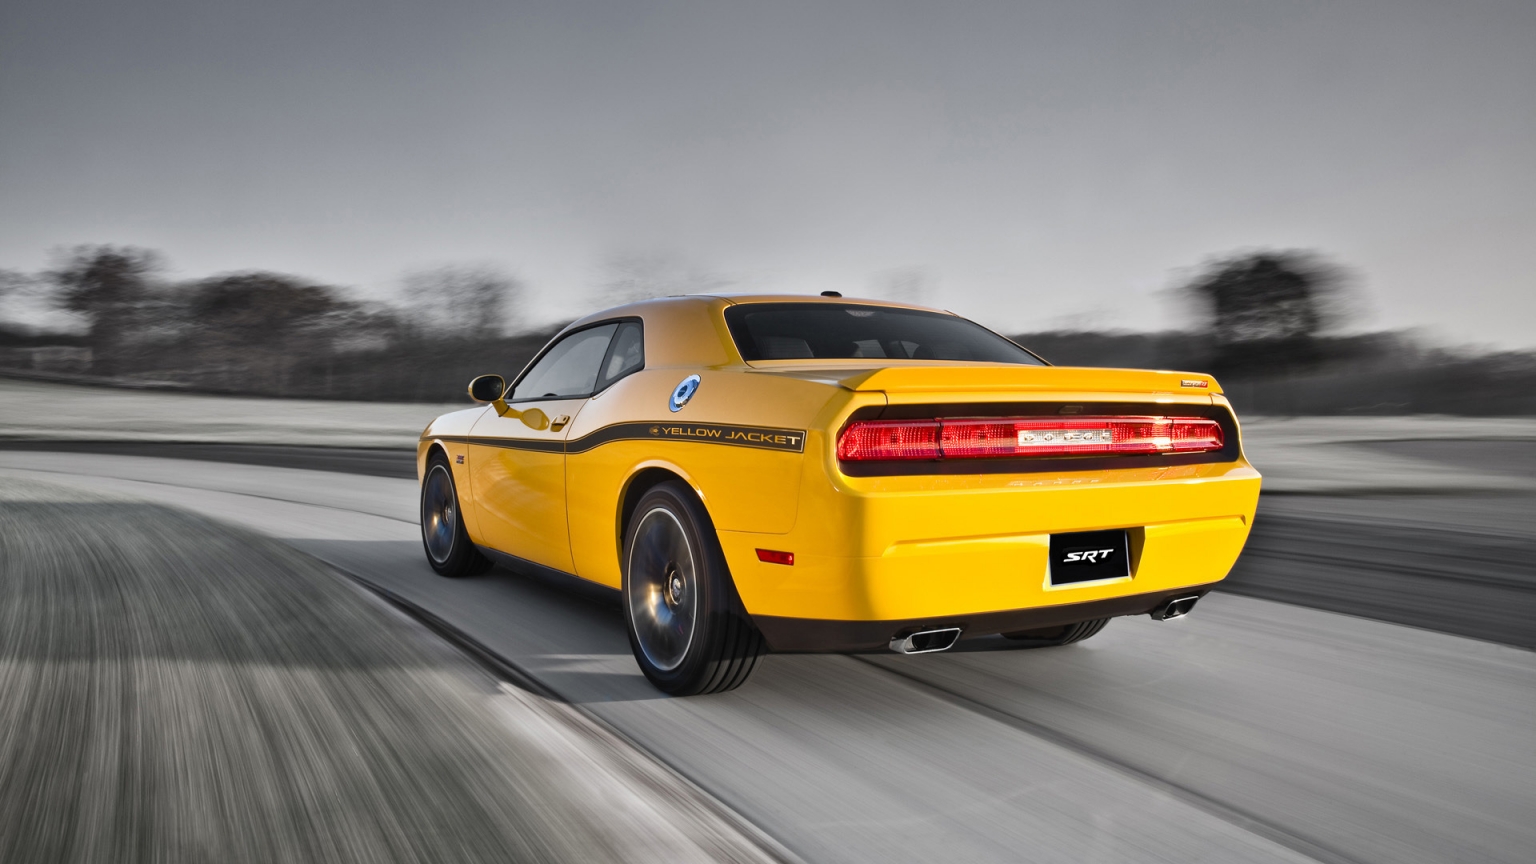 Dodge Challenger Yellow Jacket for 1536 x 864 HDTV resolution